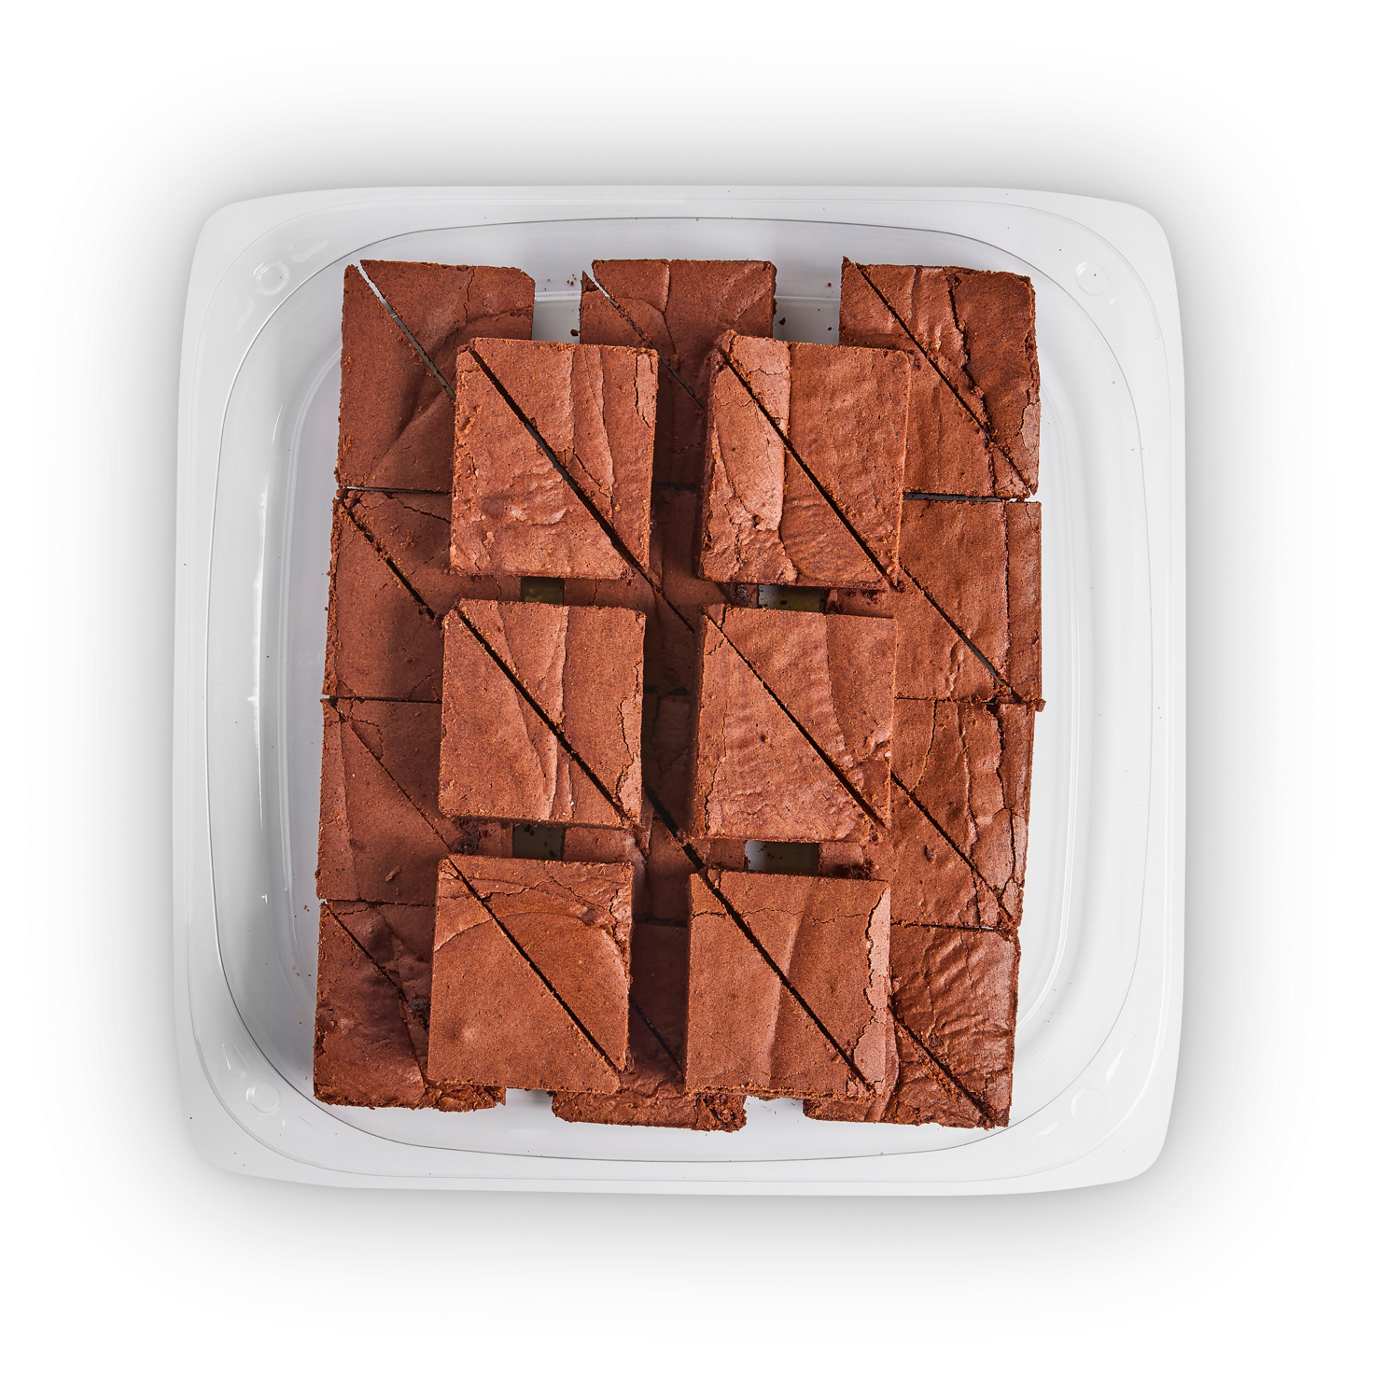 H-E-B Bakery Large Party Tray - Uniced Gourmet Brownies; image 2 of 3